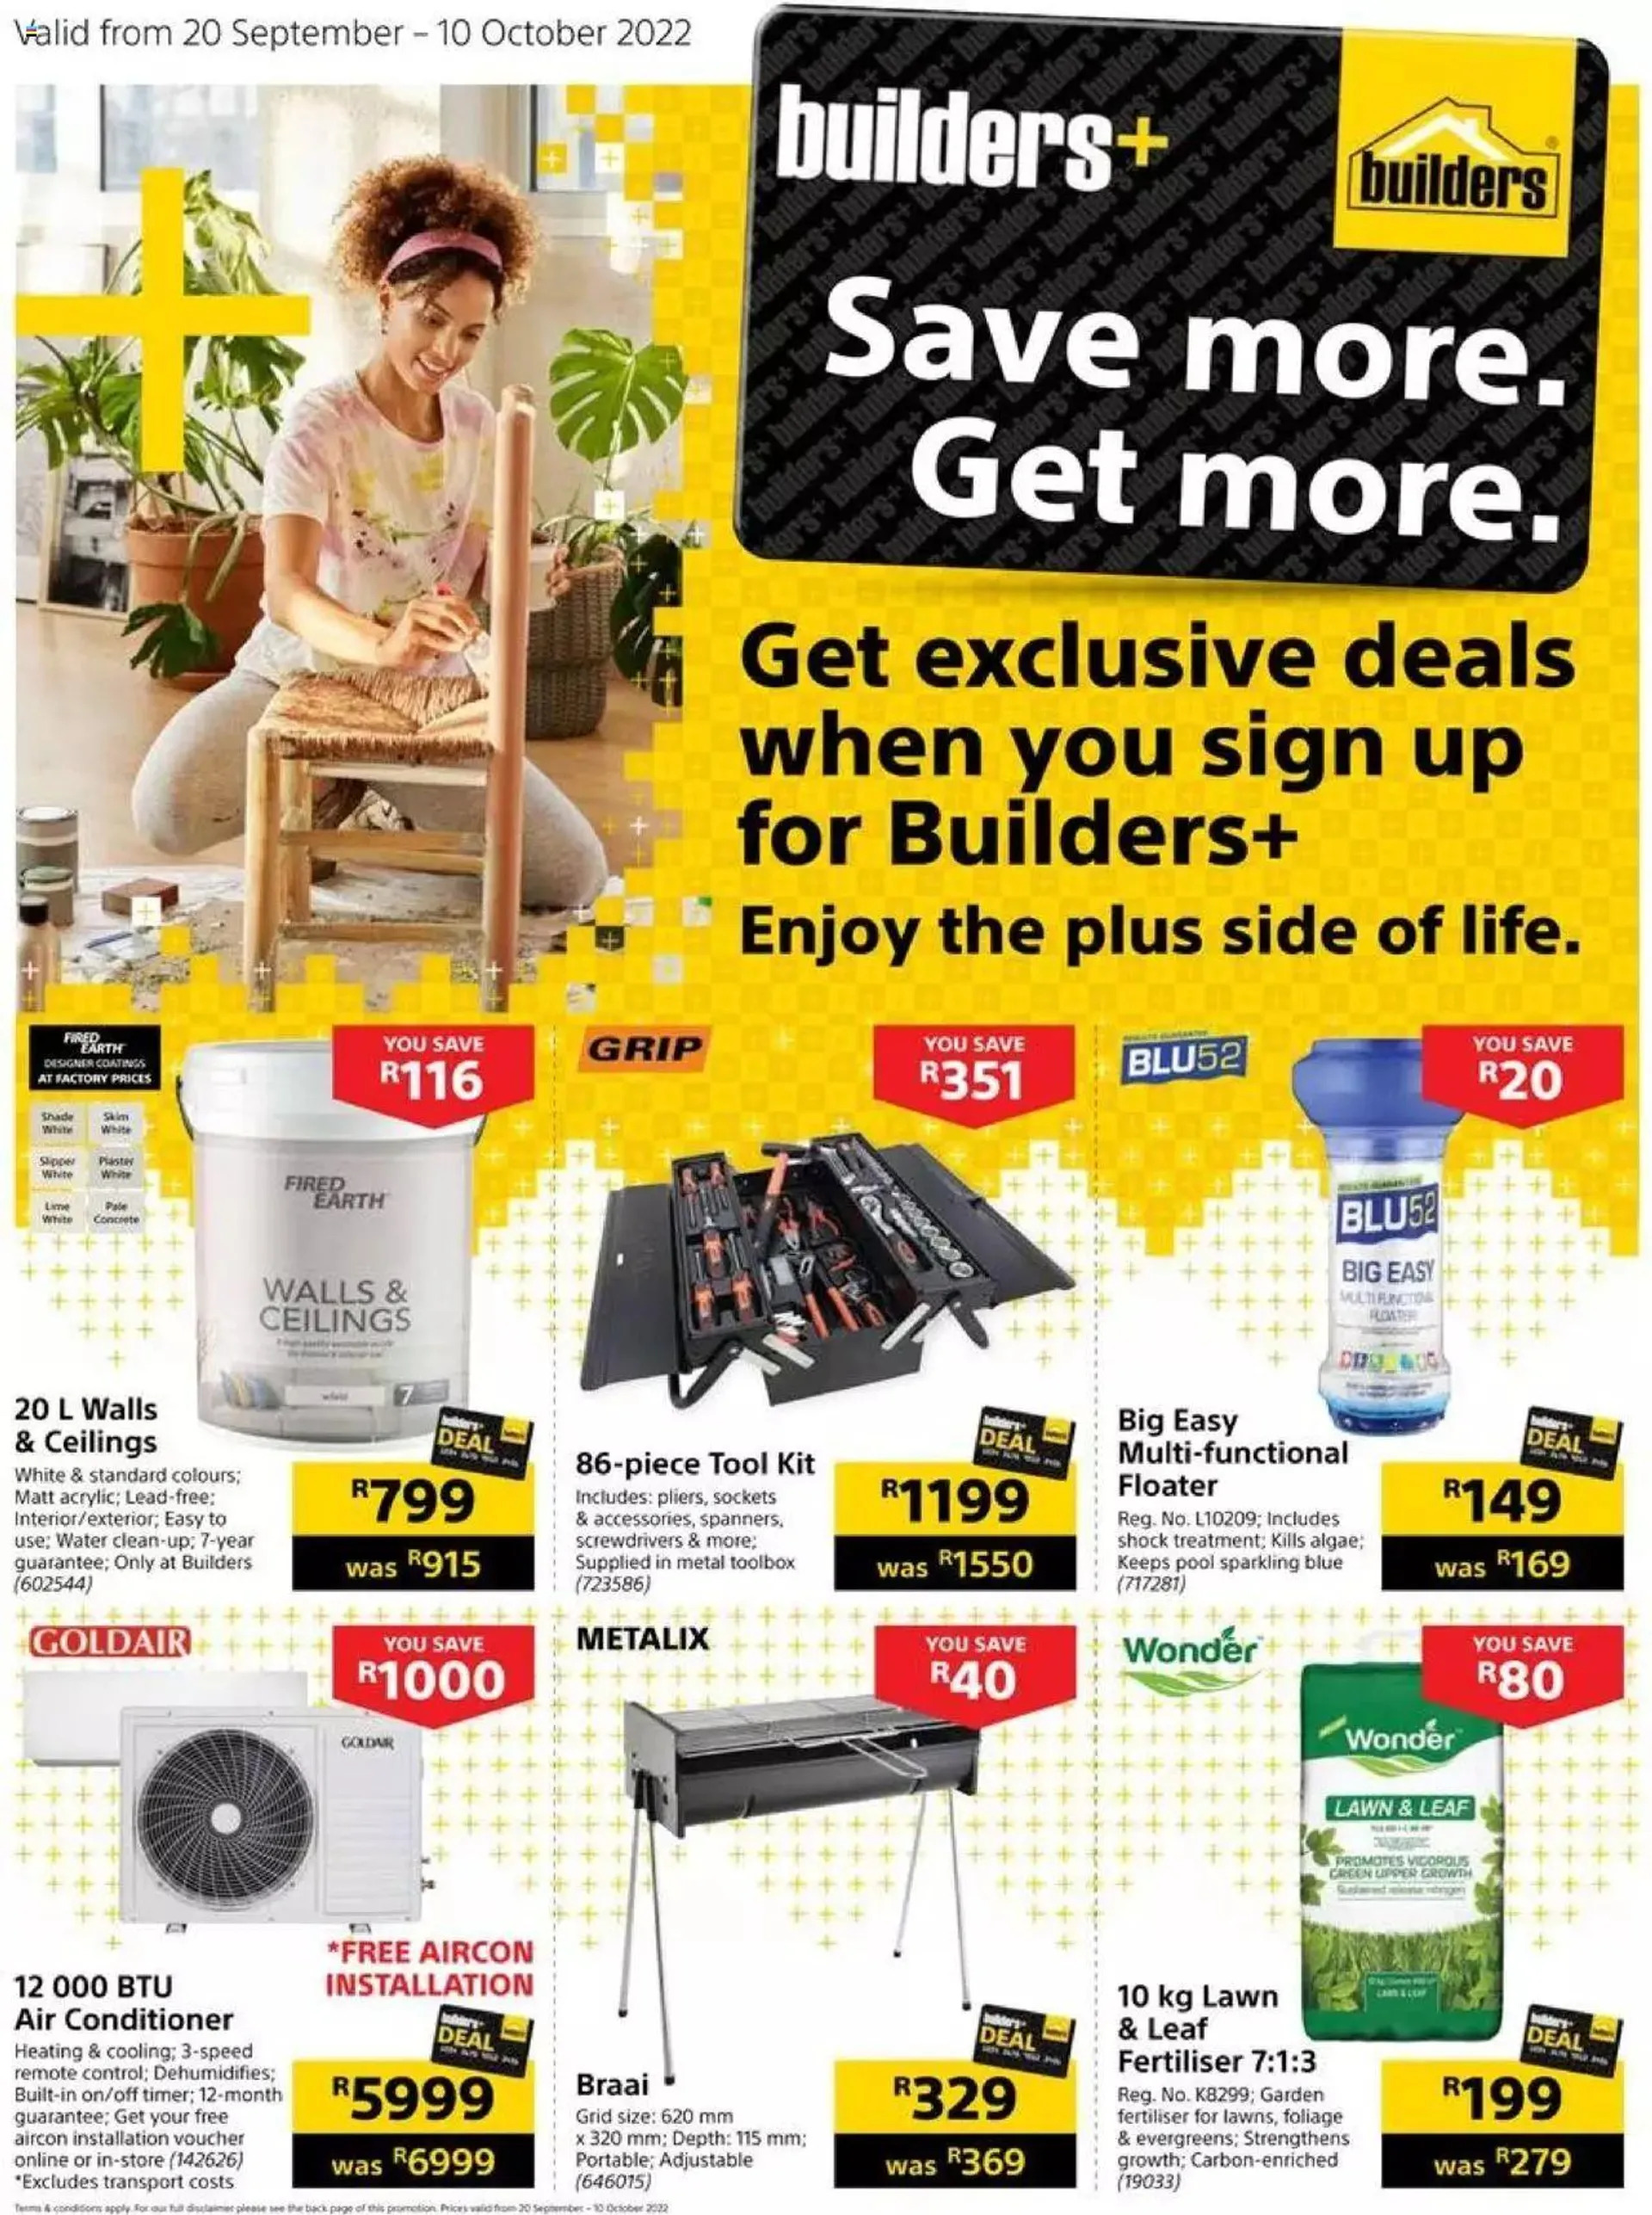 Builders - Save More, Get More - 0